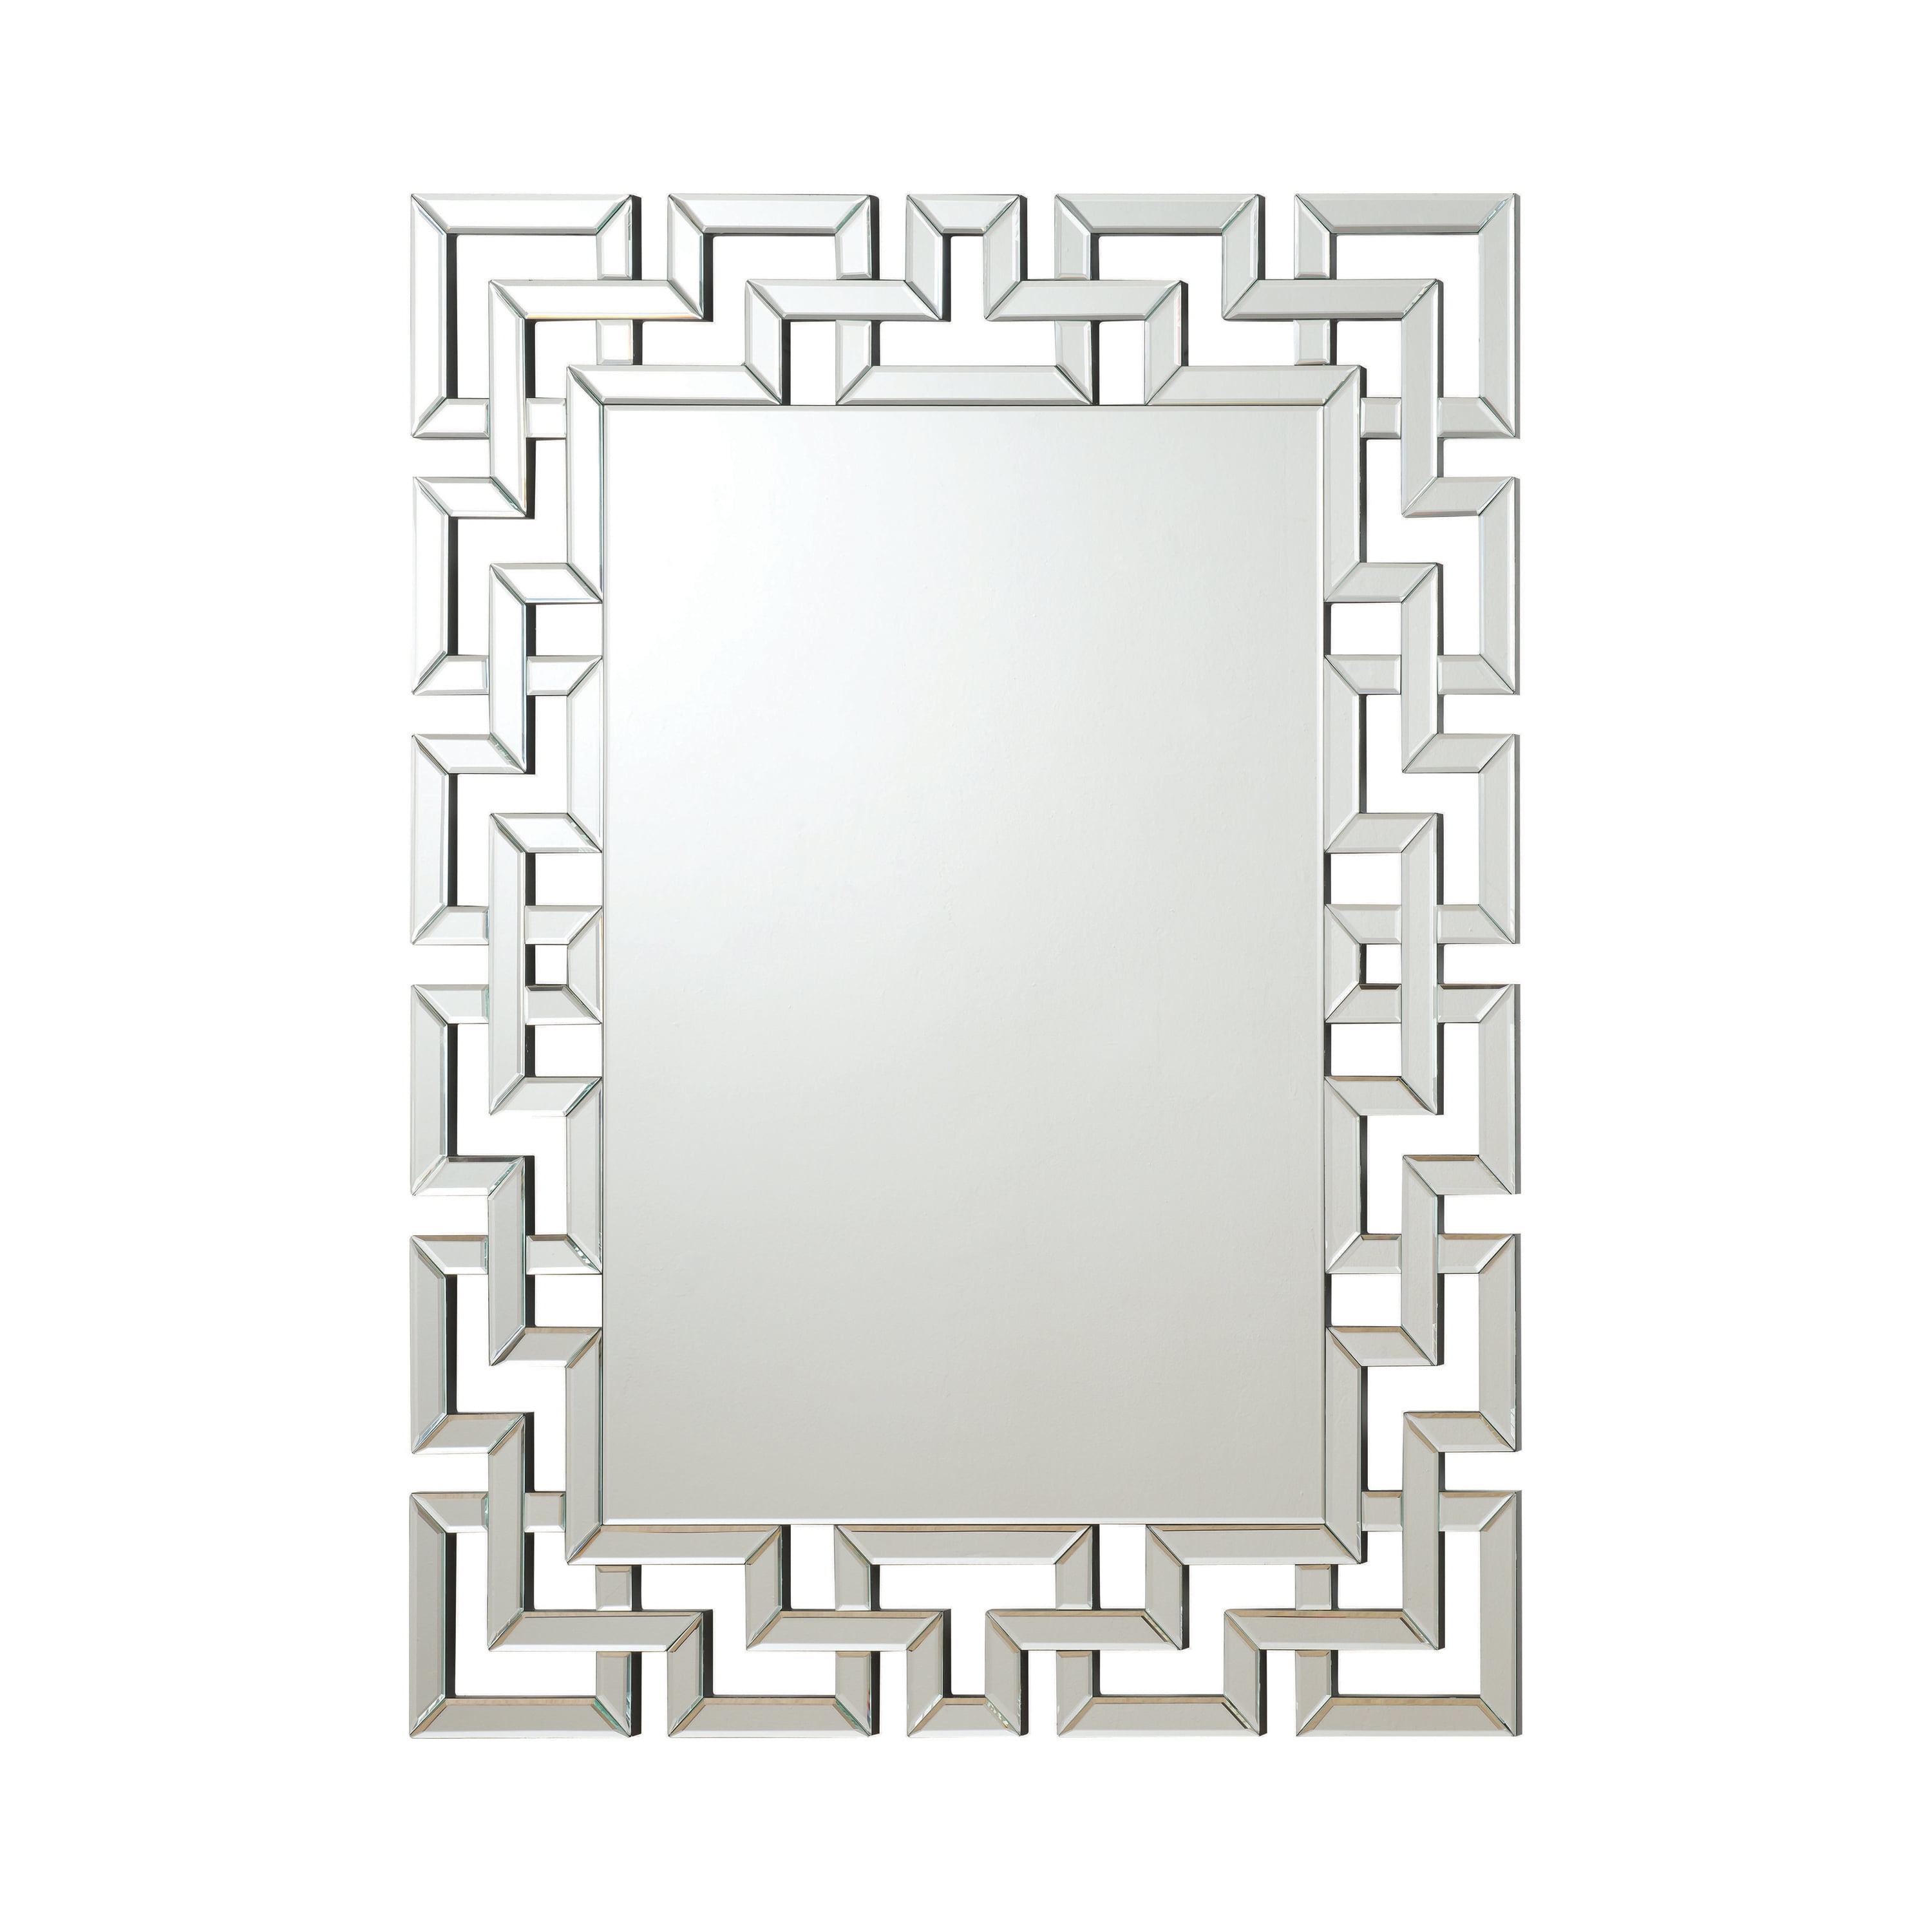 Coaster Home Furnishings Rectangular Wall Mirror with Mirrored Frame